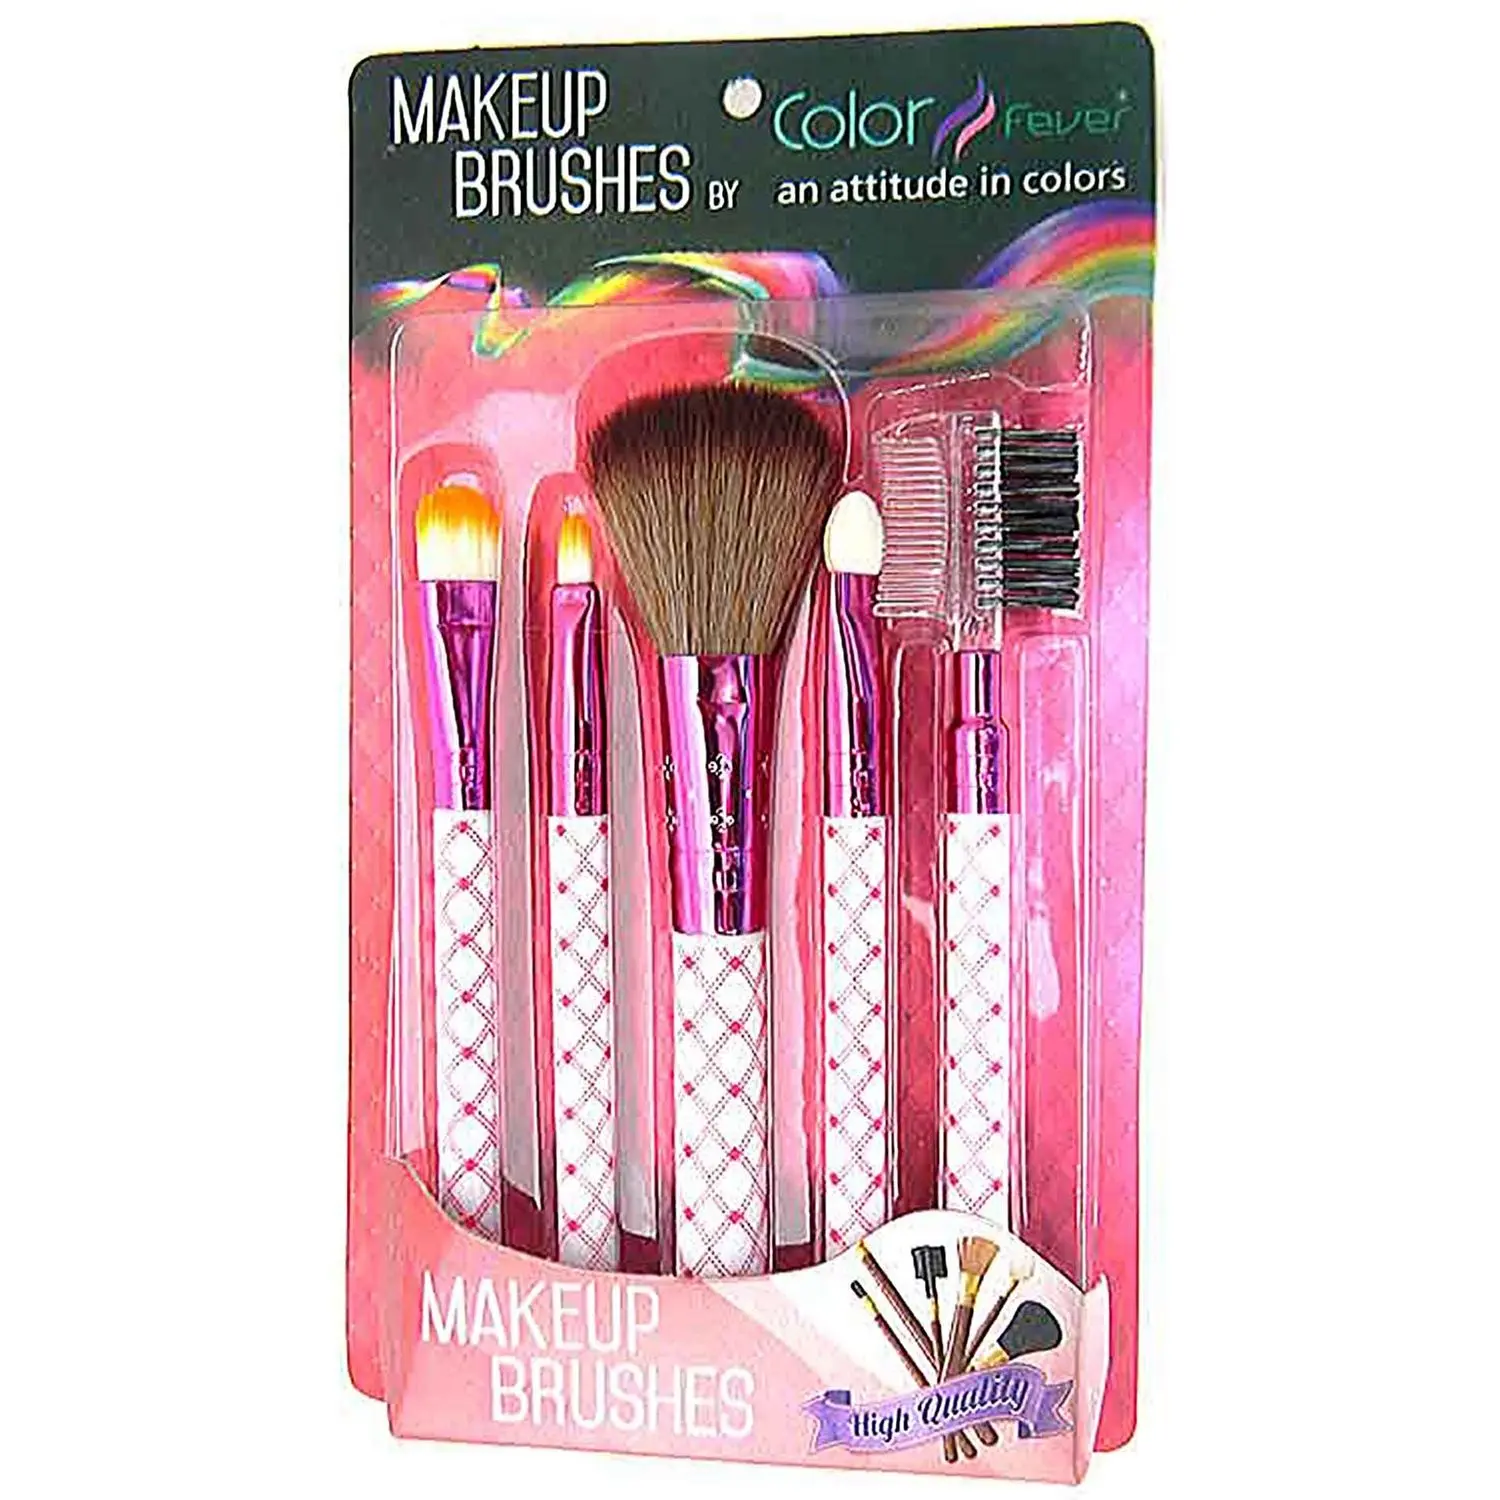 Color Fever an attitude in colors Makeup Brush Set of 5 - Hot Pink